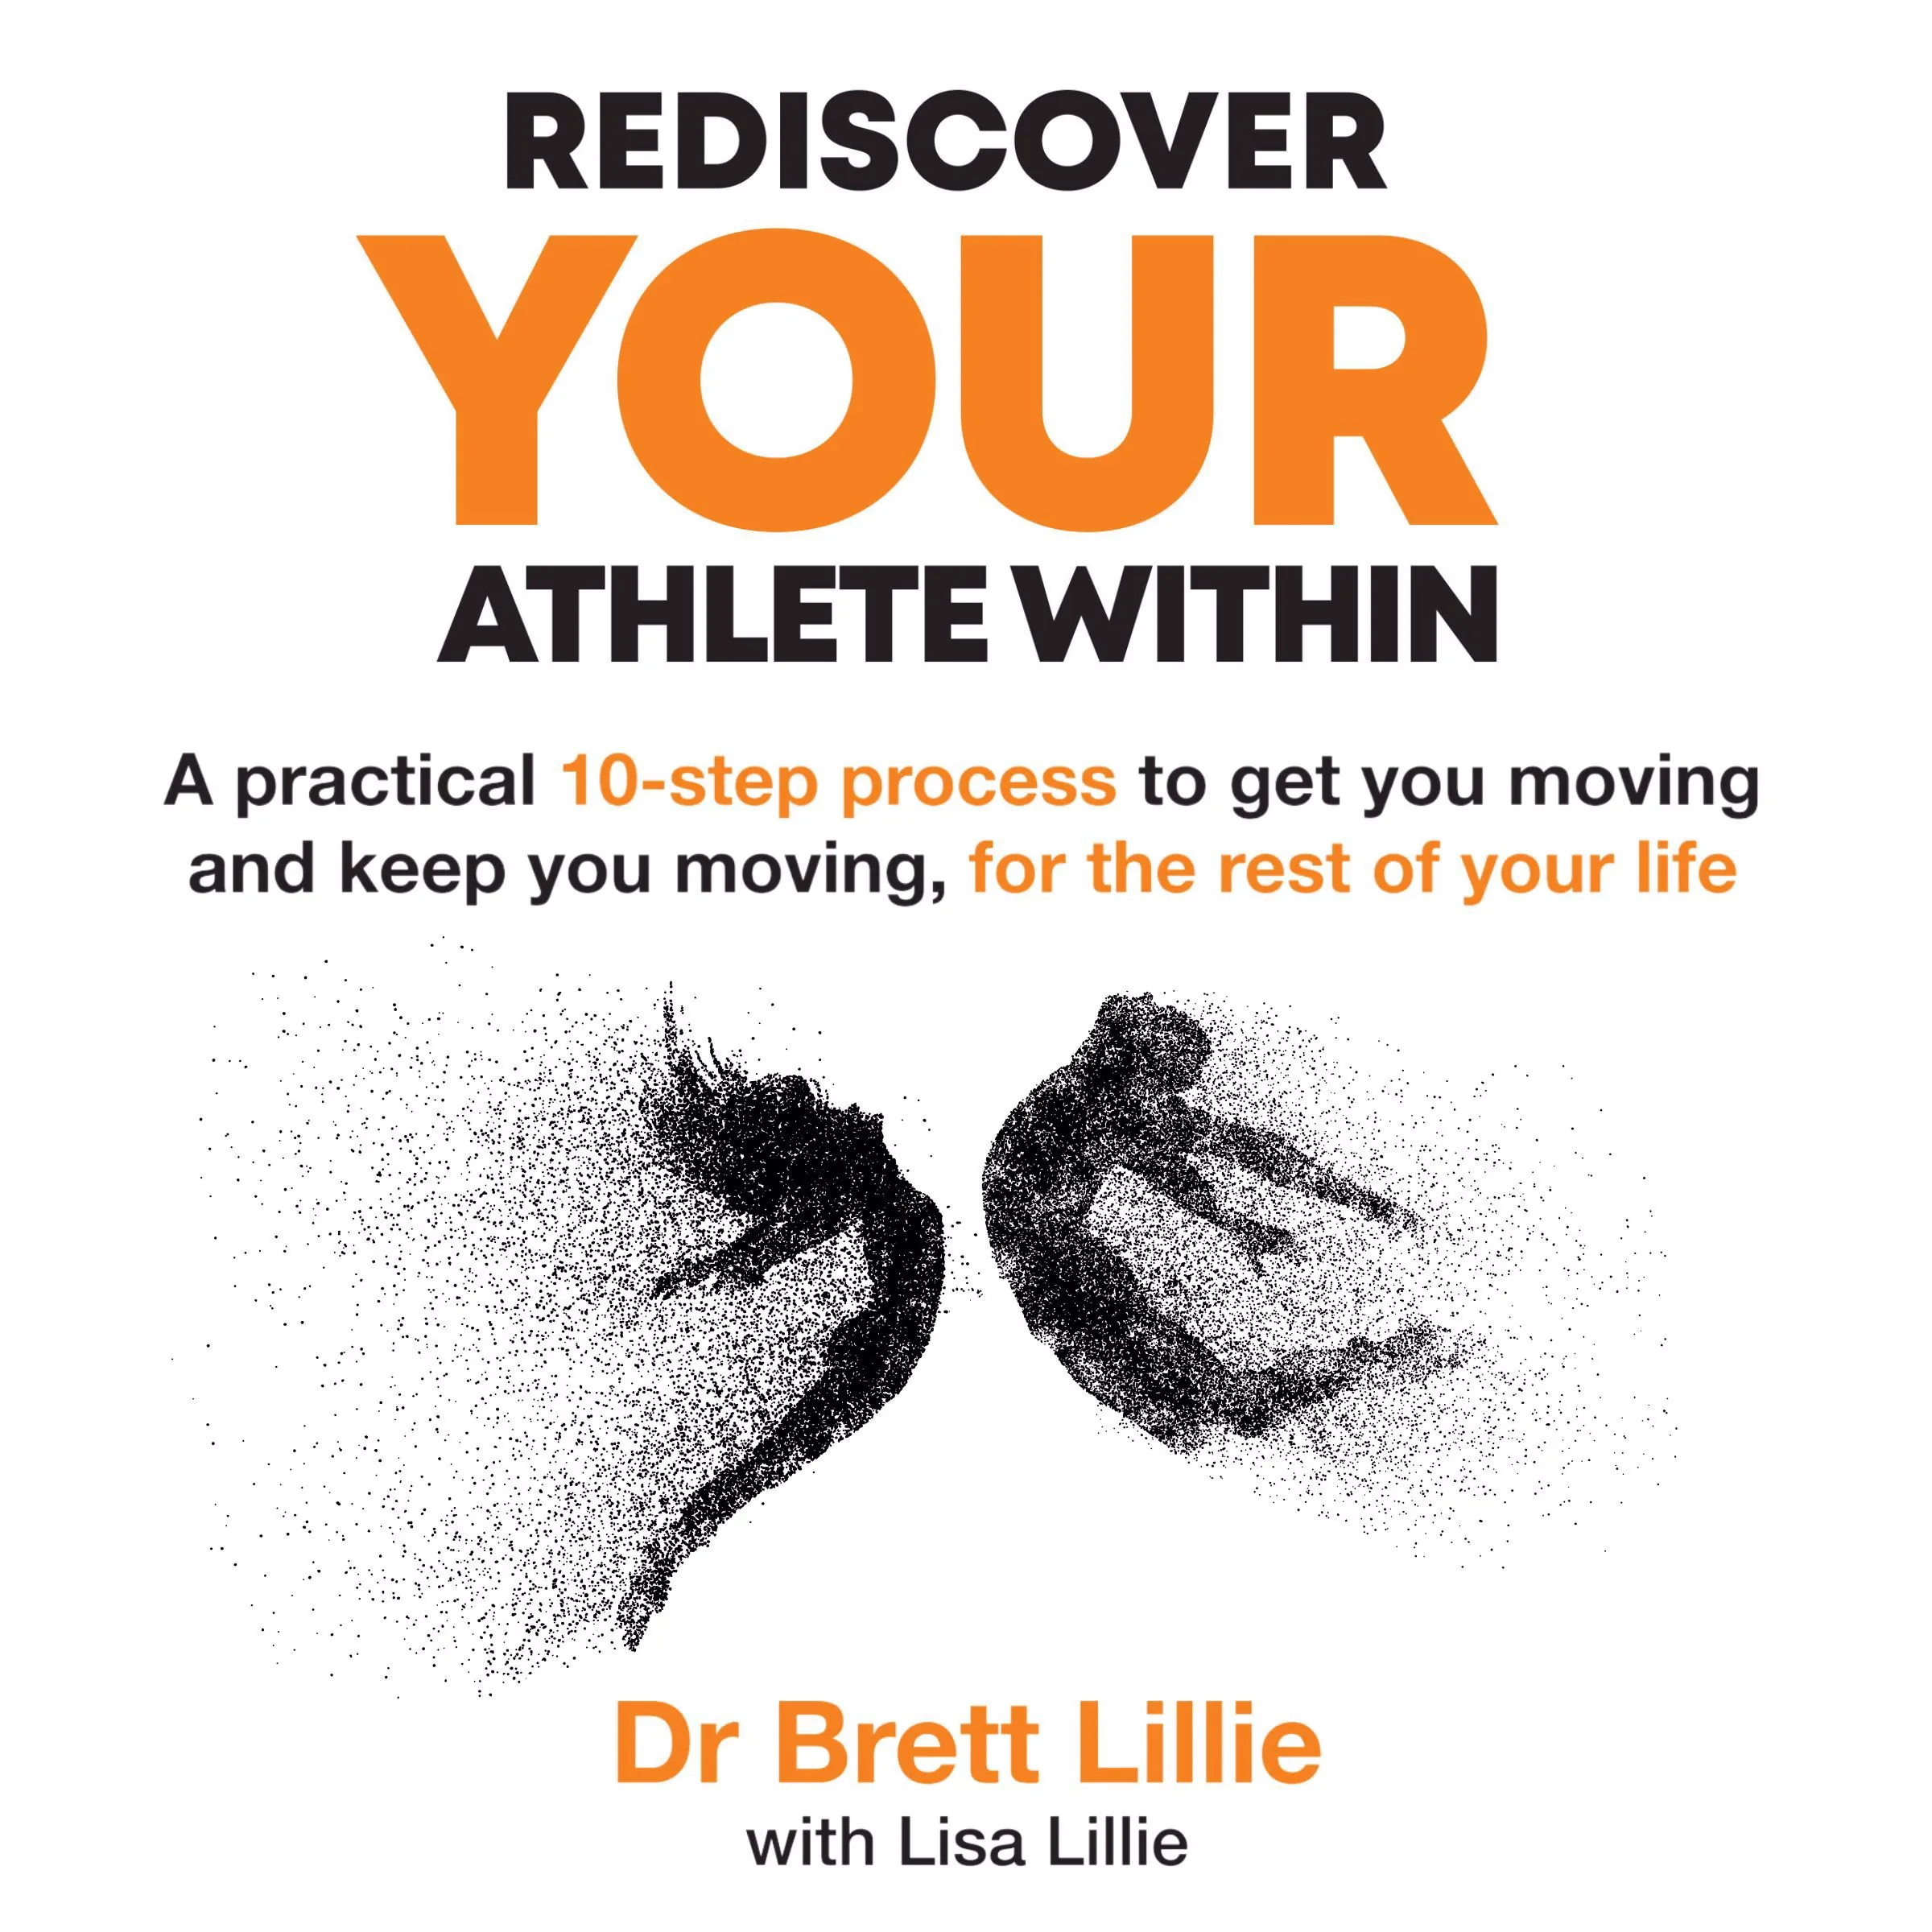 Rediscover YOUR Athlete Within Audiobook by Lisa Lillie